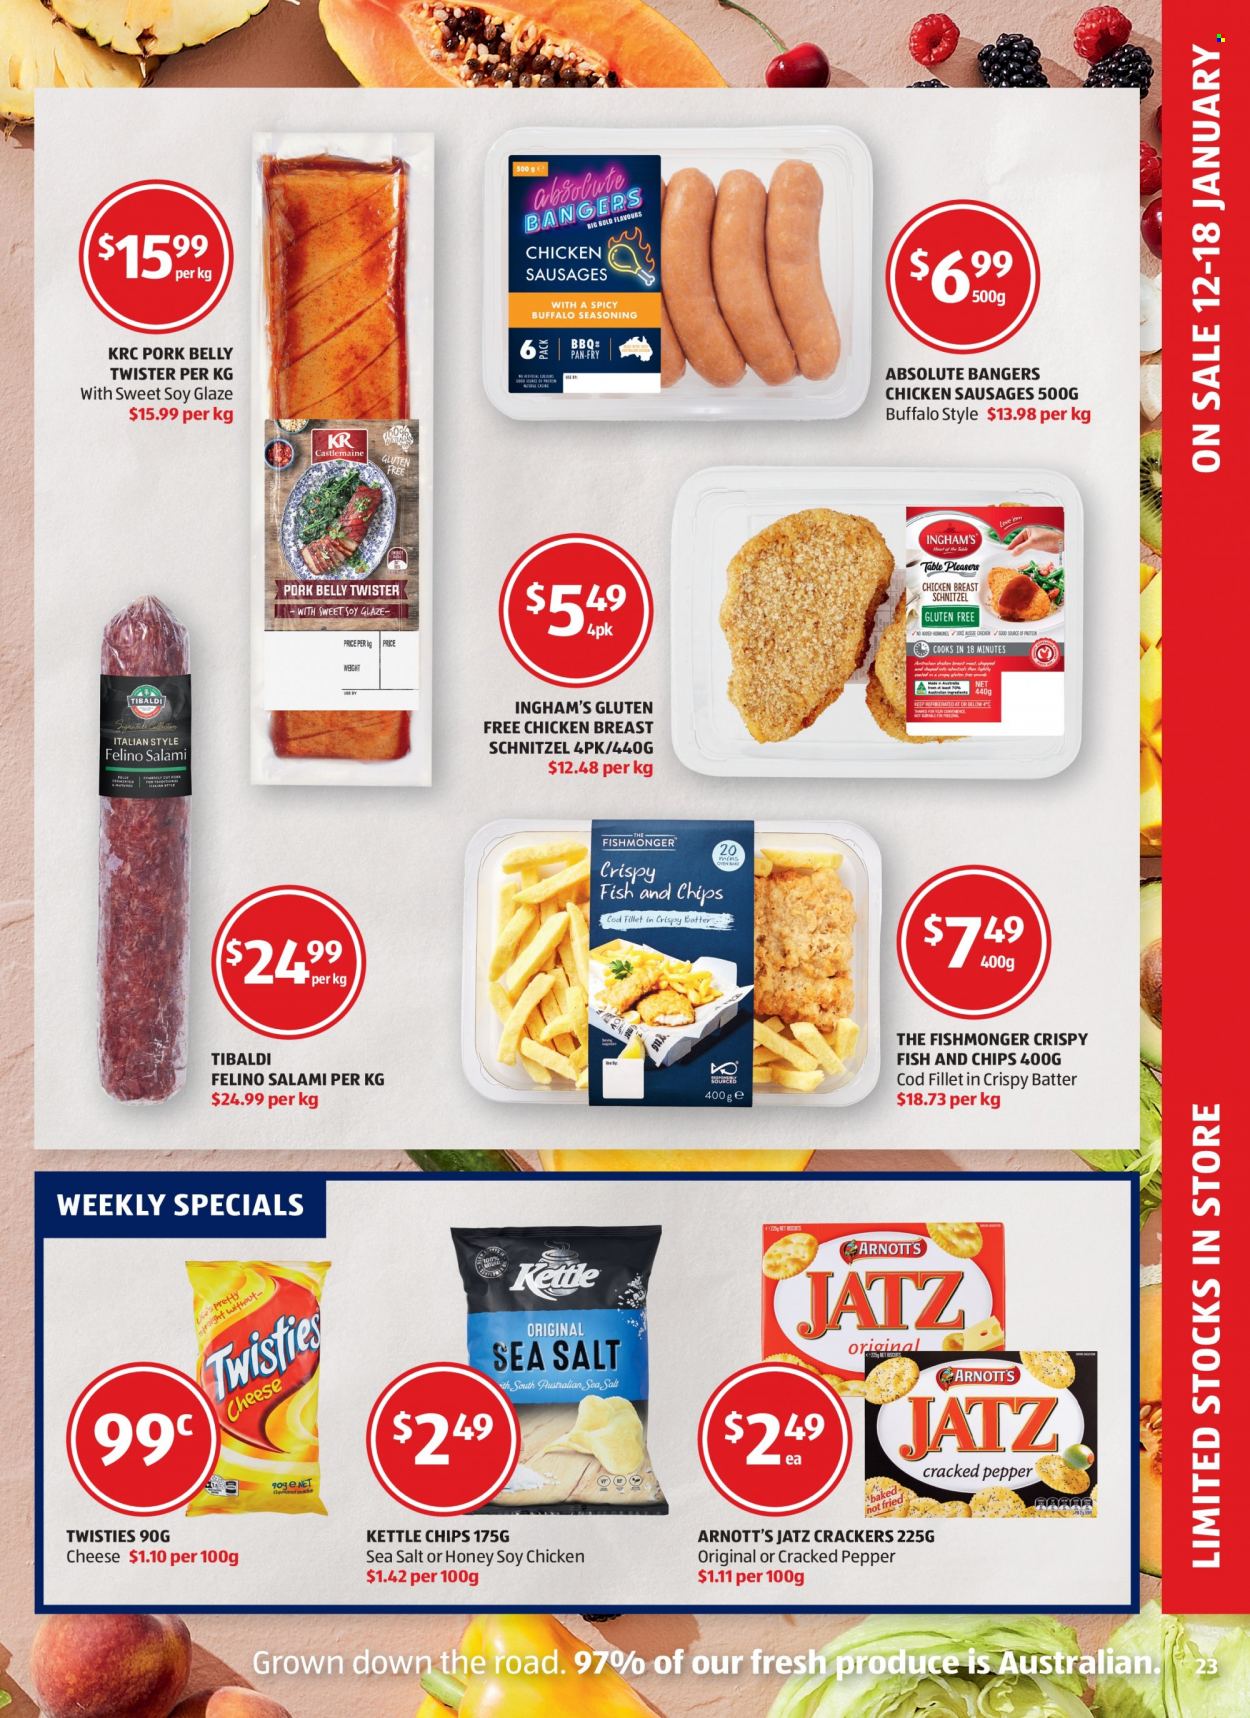 thumbnail - ALDI Catalogue - 19 Jan 2022 - 25 Jan 2022 - Sales products - cod, Fishmonger, schnitzel, salami, sausage, bangers, cheese, crackers, chips, kettle, spice, chicken breasts, pork belly, pork meat, Absolute, fork, pan, table, Twister. Page 23.